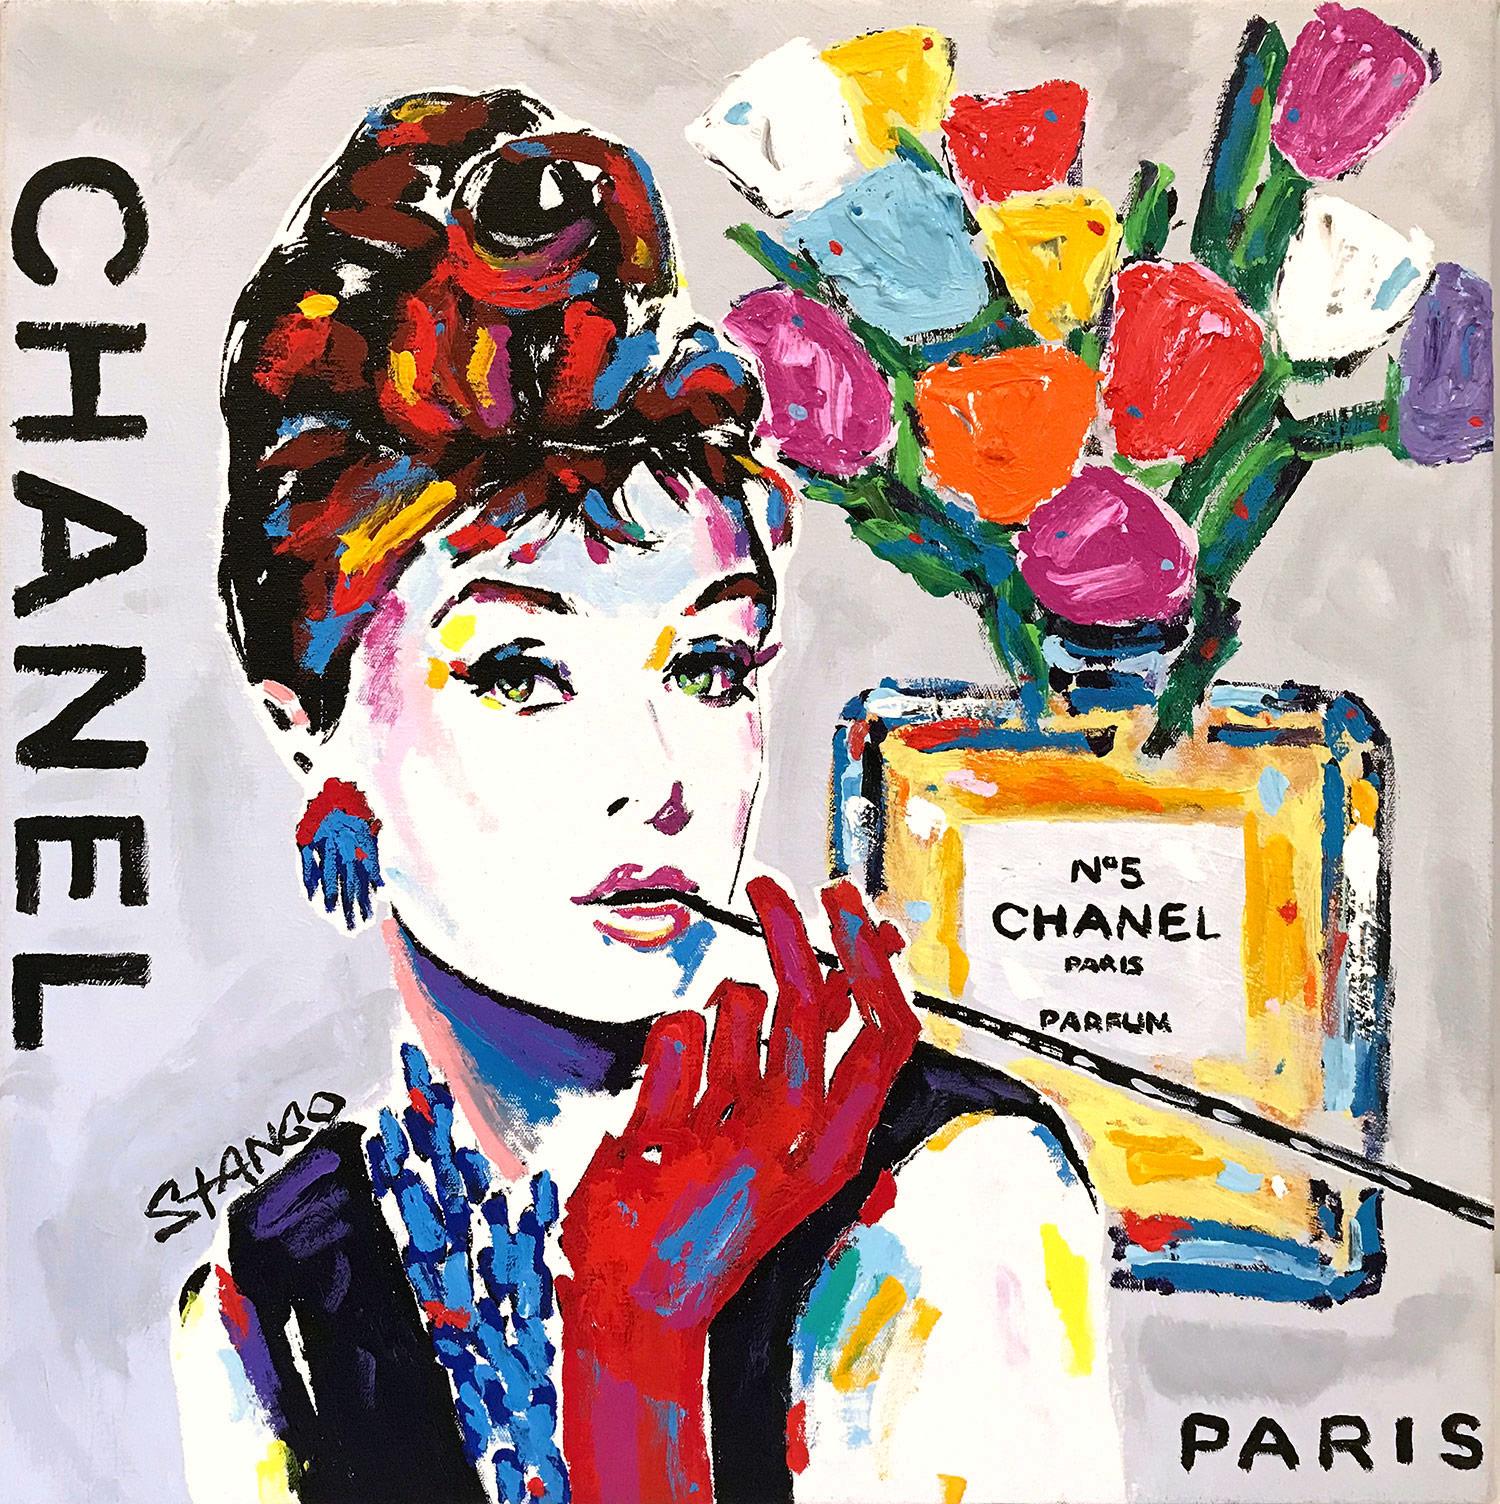 A Little Silver Audrey Hepburn & Chanel No5 Pop Art Acrylic Painting on  Canvas